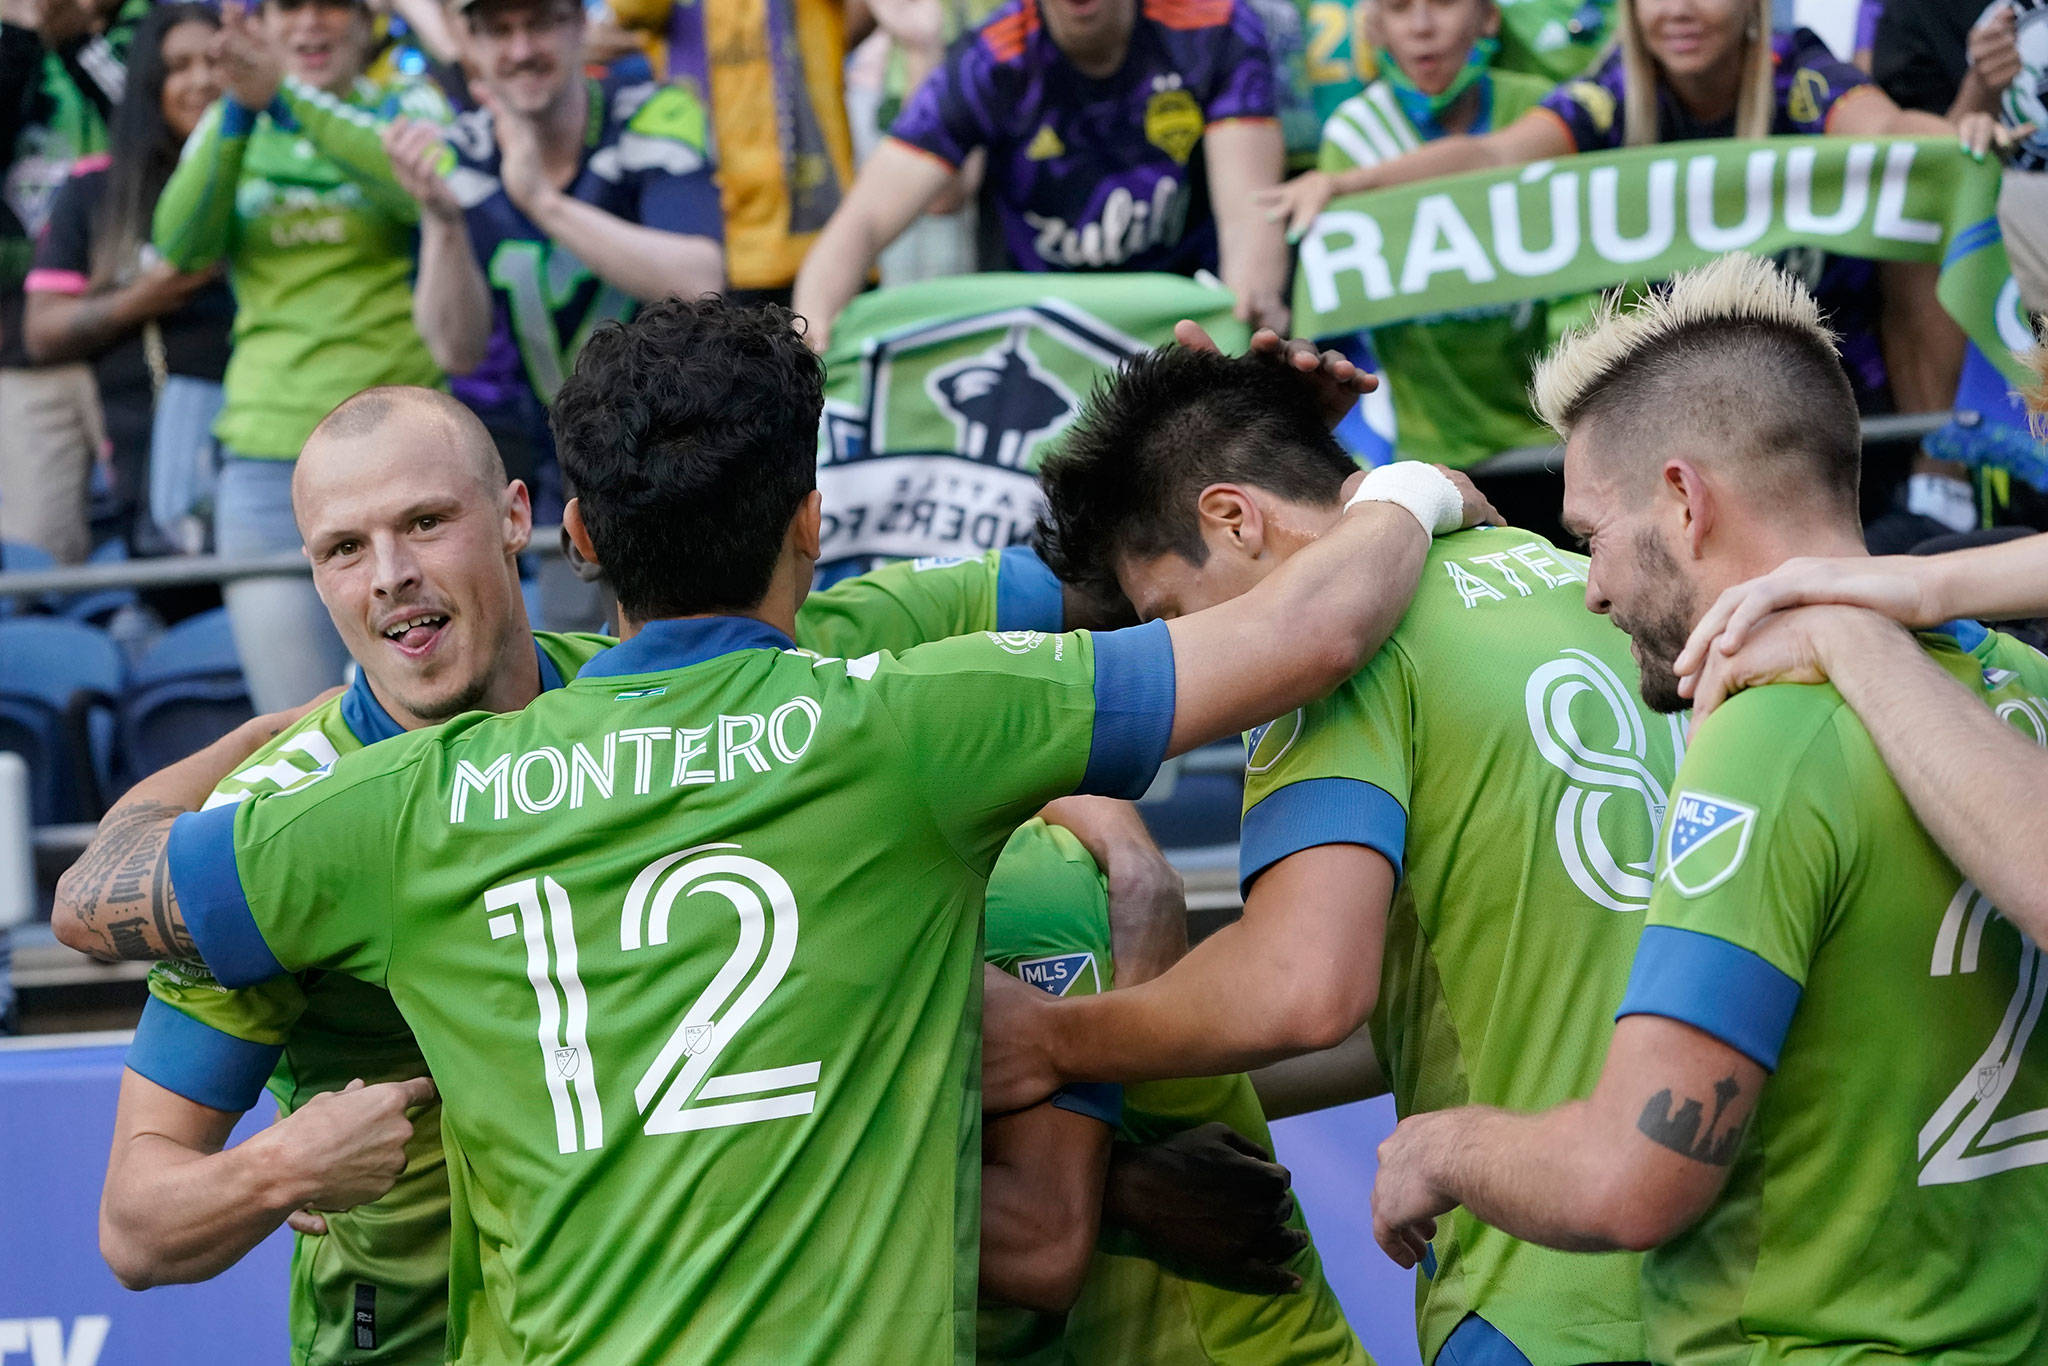 Sounders players, including Brad Smith (left), and Fredy Montero (12), surround forward Raul Ruidiaz (obscured) after Ruidiaz scored a goal against the Dynamo during the second half of an MLS match on July 7, 2021, in Seattle. The Sounders won 2-0. (AP Photo/Ted S. Warren)